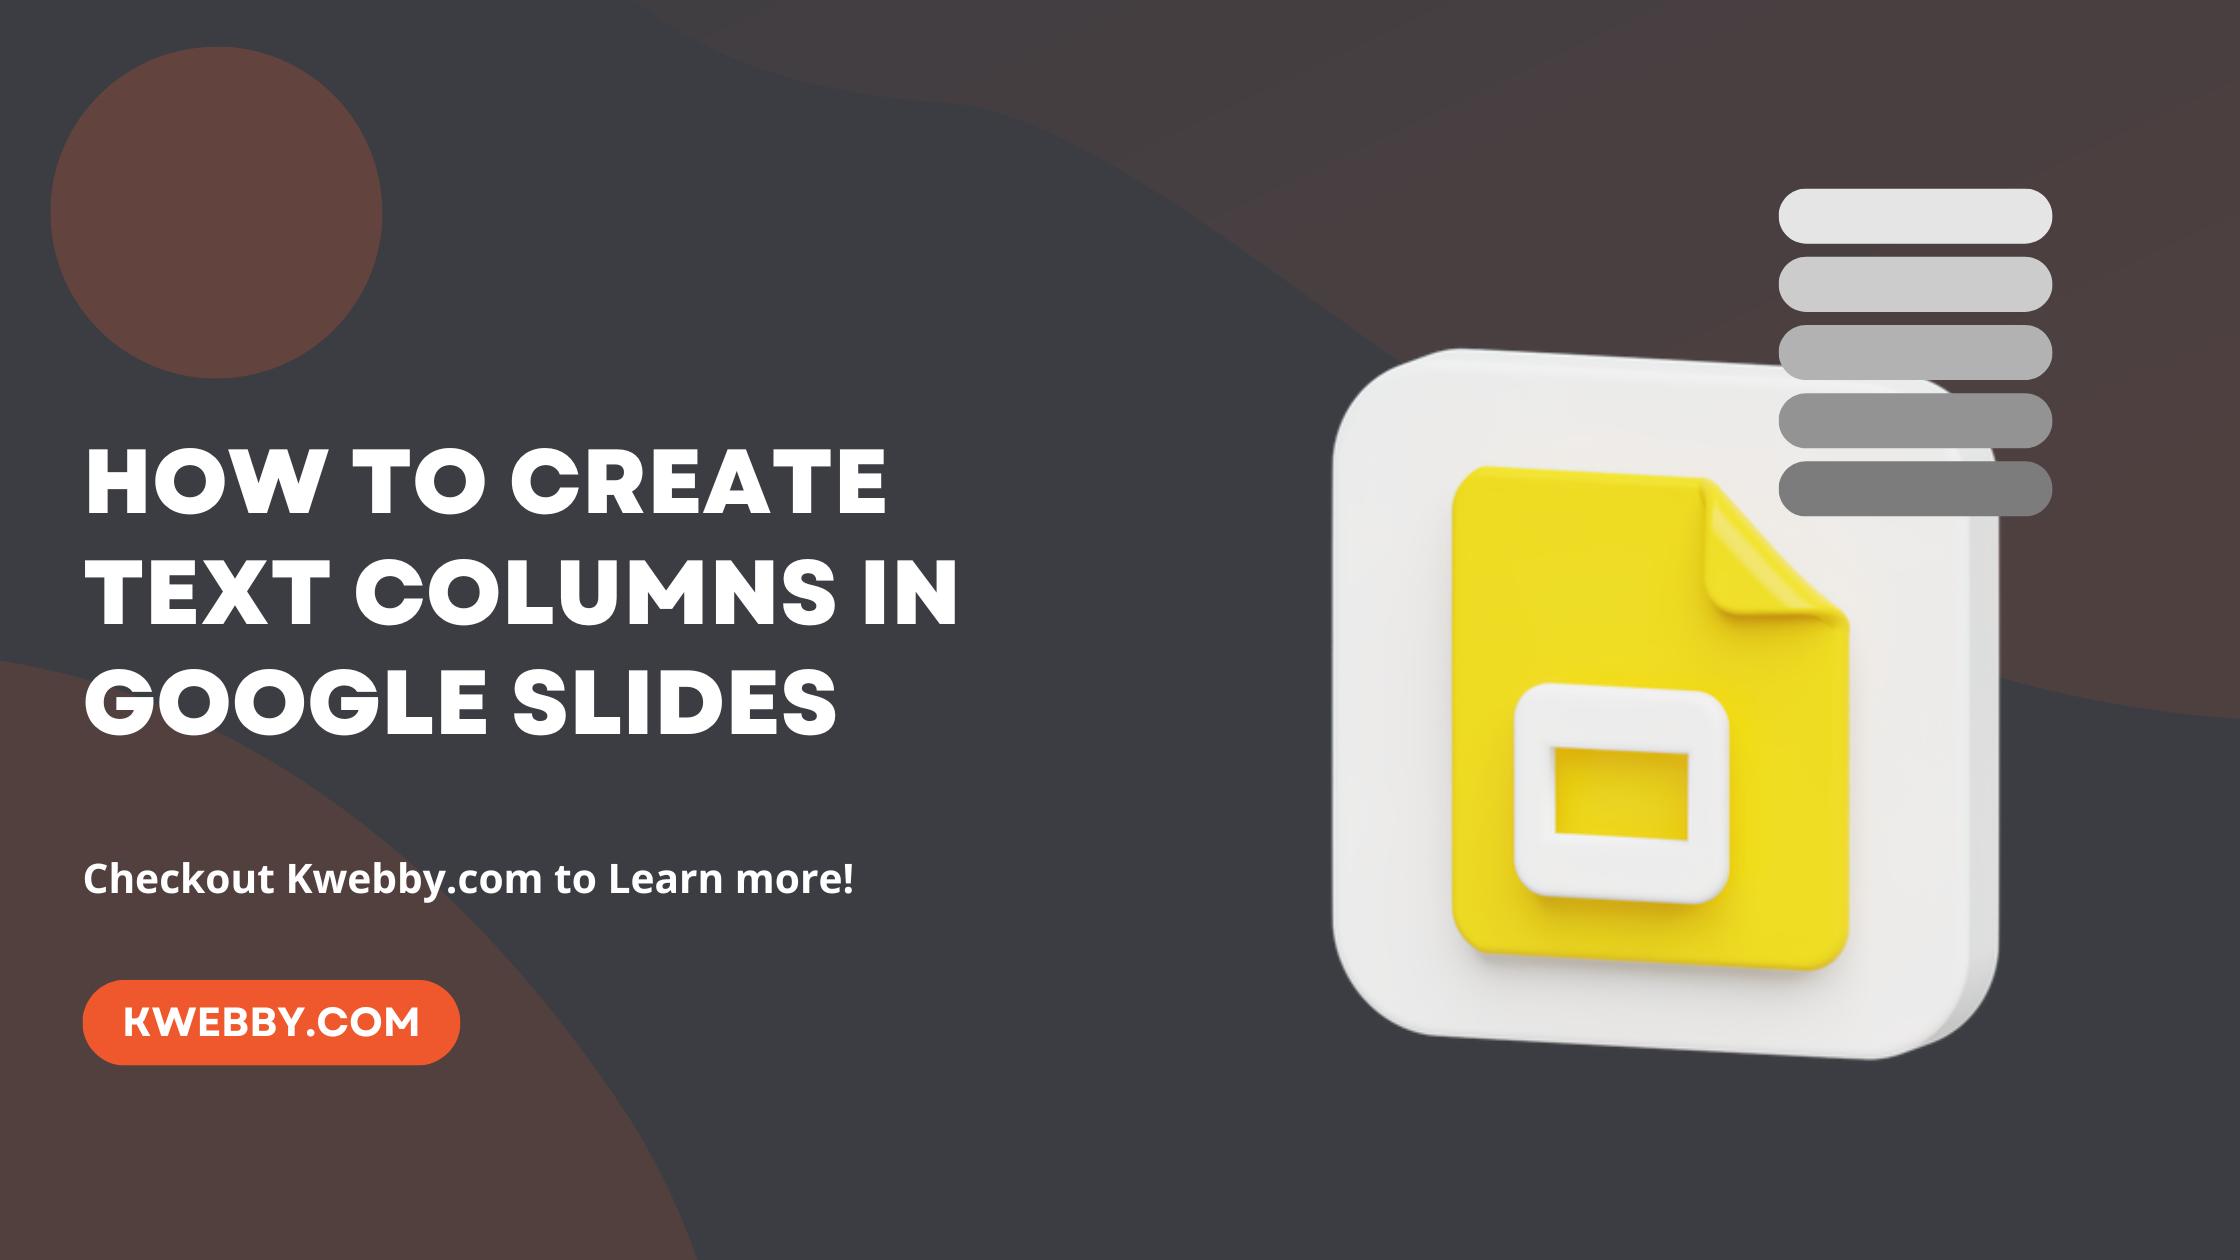 How to Create Text Columns in Google Slides